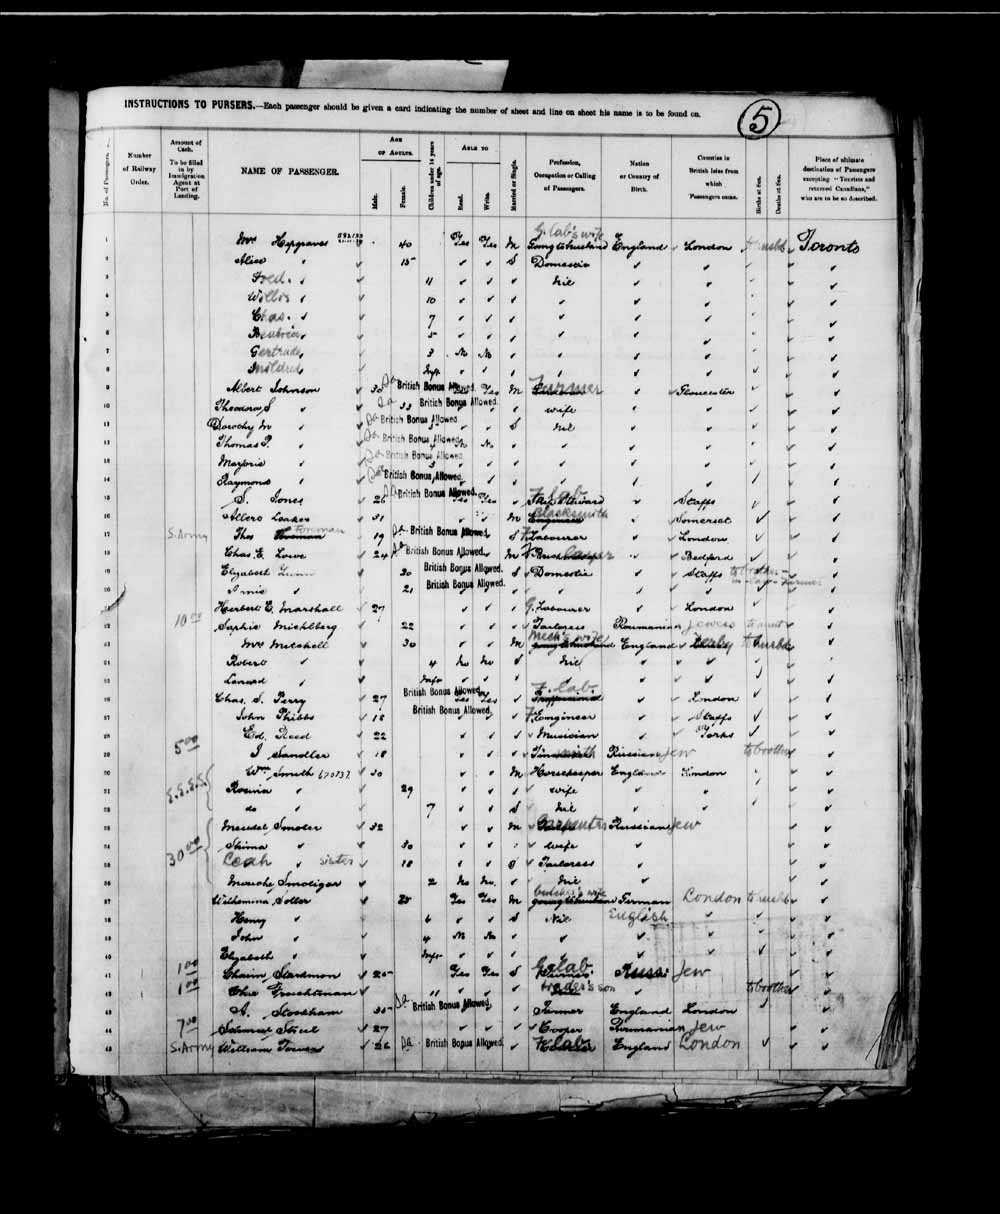 Digitized page of Passenger Lists for Image No.: e003658075